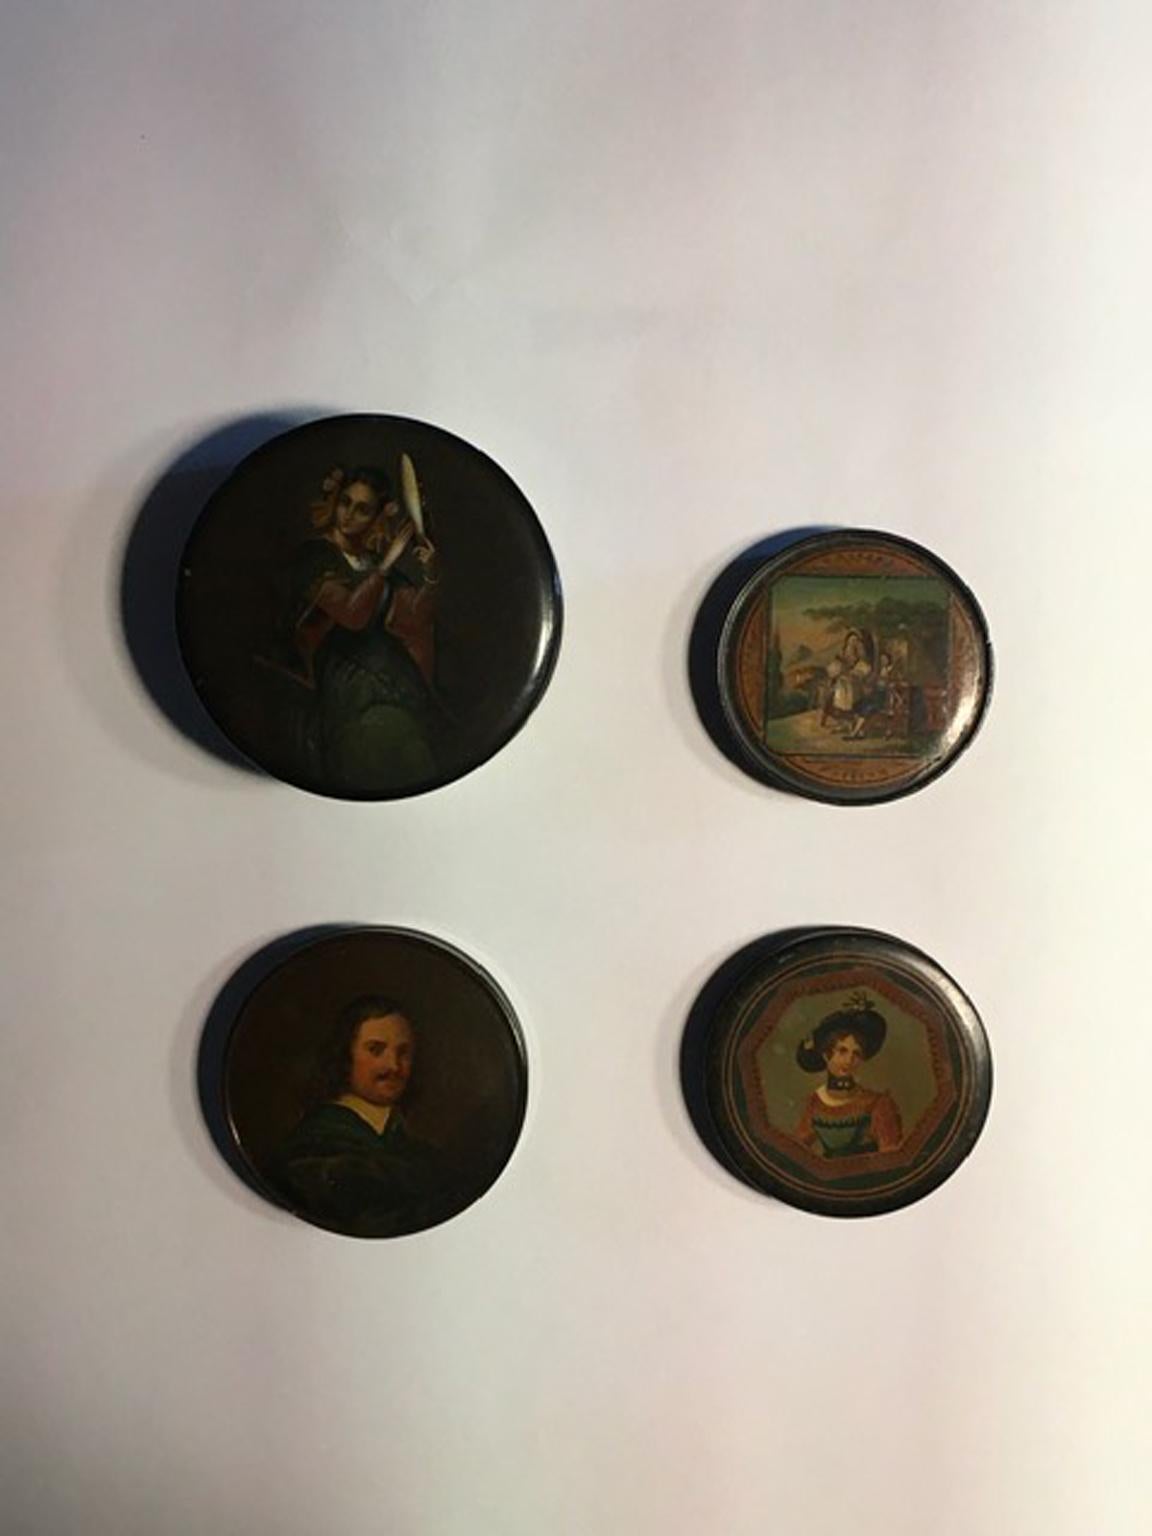 These fine wood lacquered wood boxes are in Flemish style; the cover are hand painted with portraits, so fine as Flemish painting can be.

These pieces could be part of your Wonderkammer or to be elegant collectibles artworks.
Provenience Norther